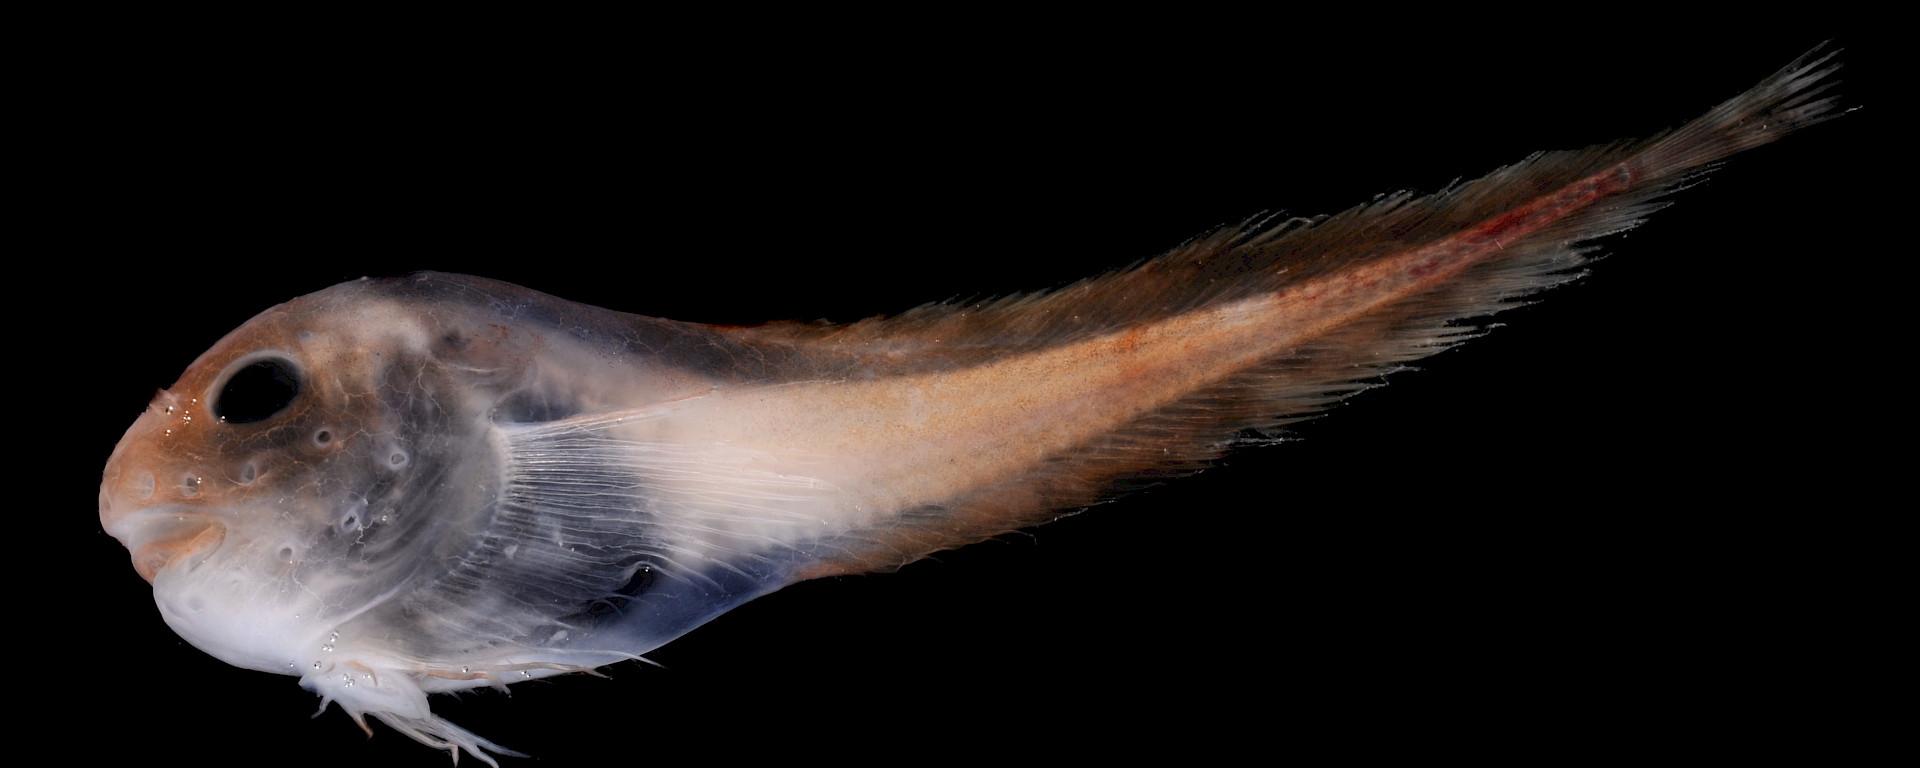 Translucent fish against a black background with a rounded head and body and tapered tail.